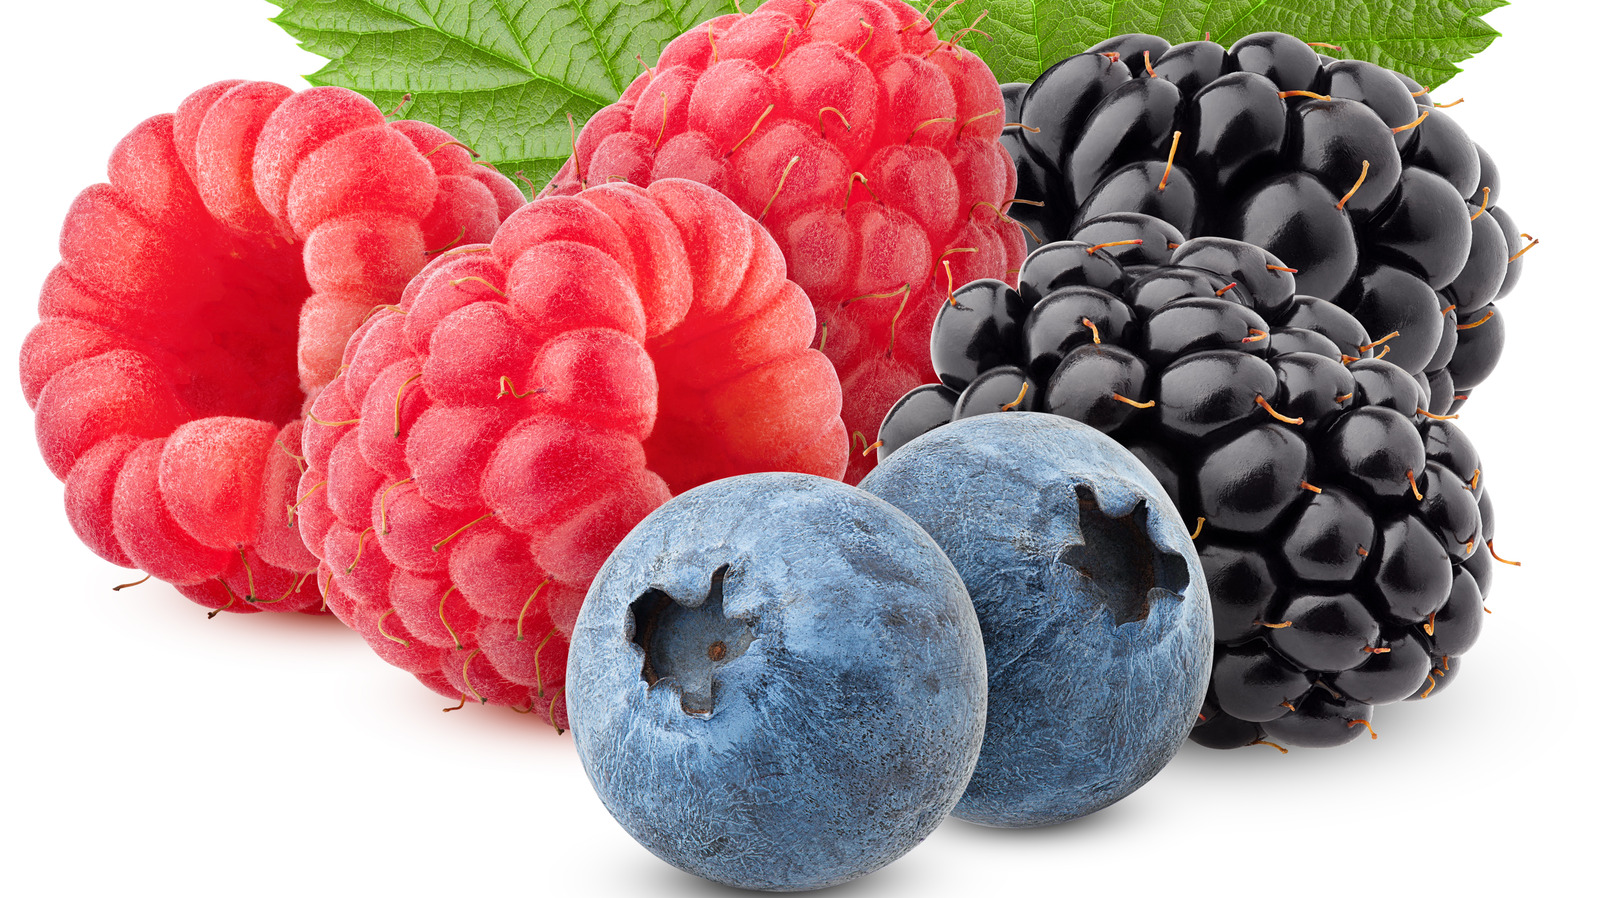 When You Eat Berries Every Day, This Is What Happens To Your Body